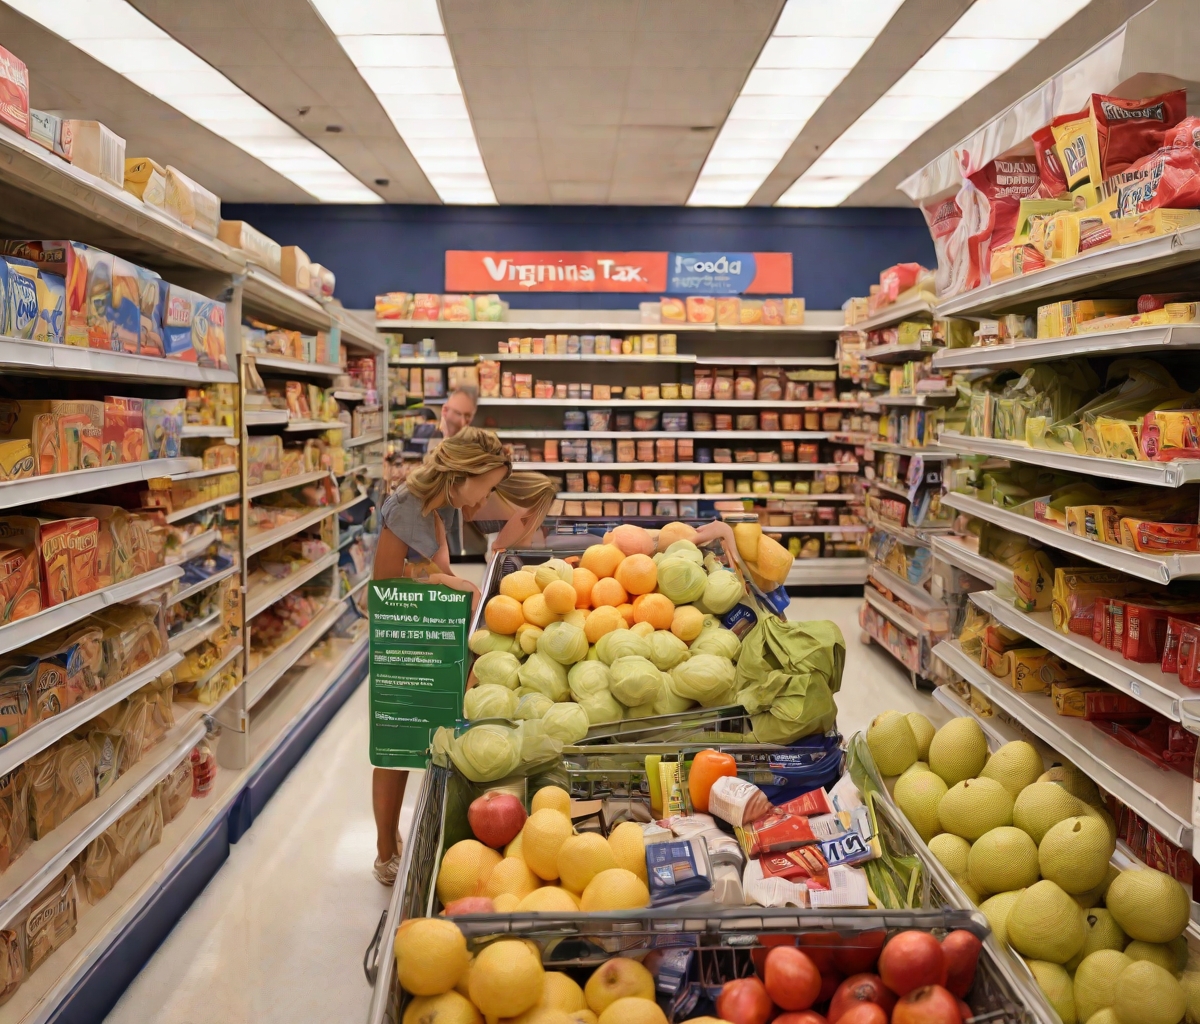 Virginia Food Tax Discover How to Save Big on Groceries LawLexs